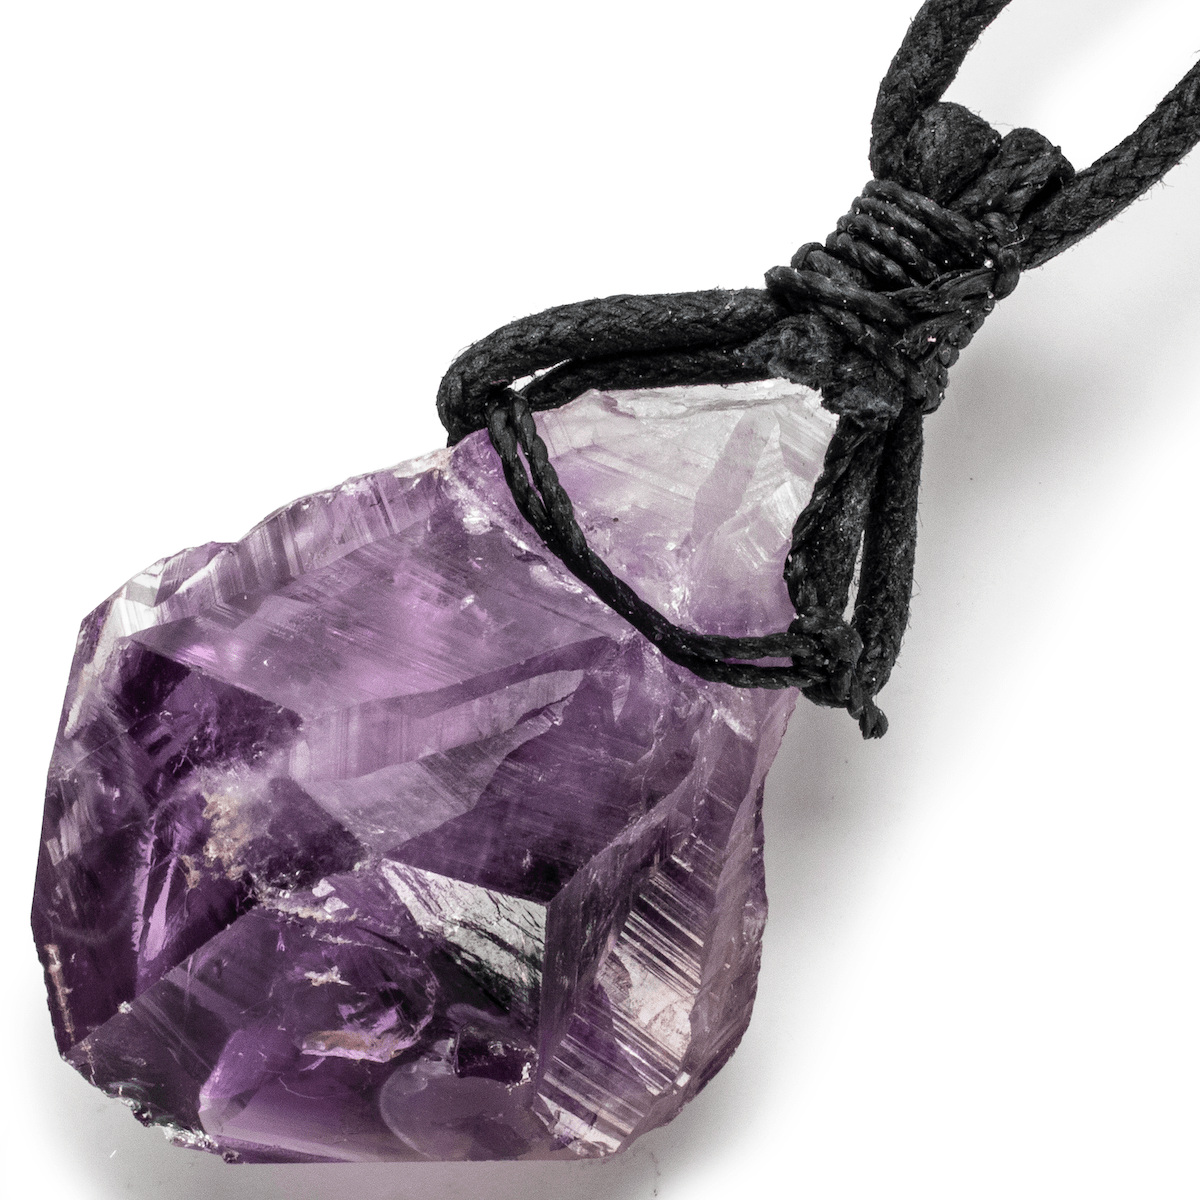 Amethyst Point Necklace for All - Elegance & Healing | Luck Strings